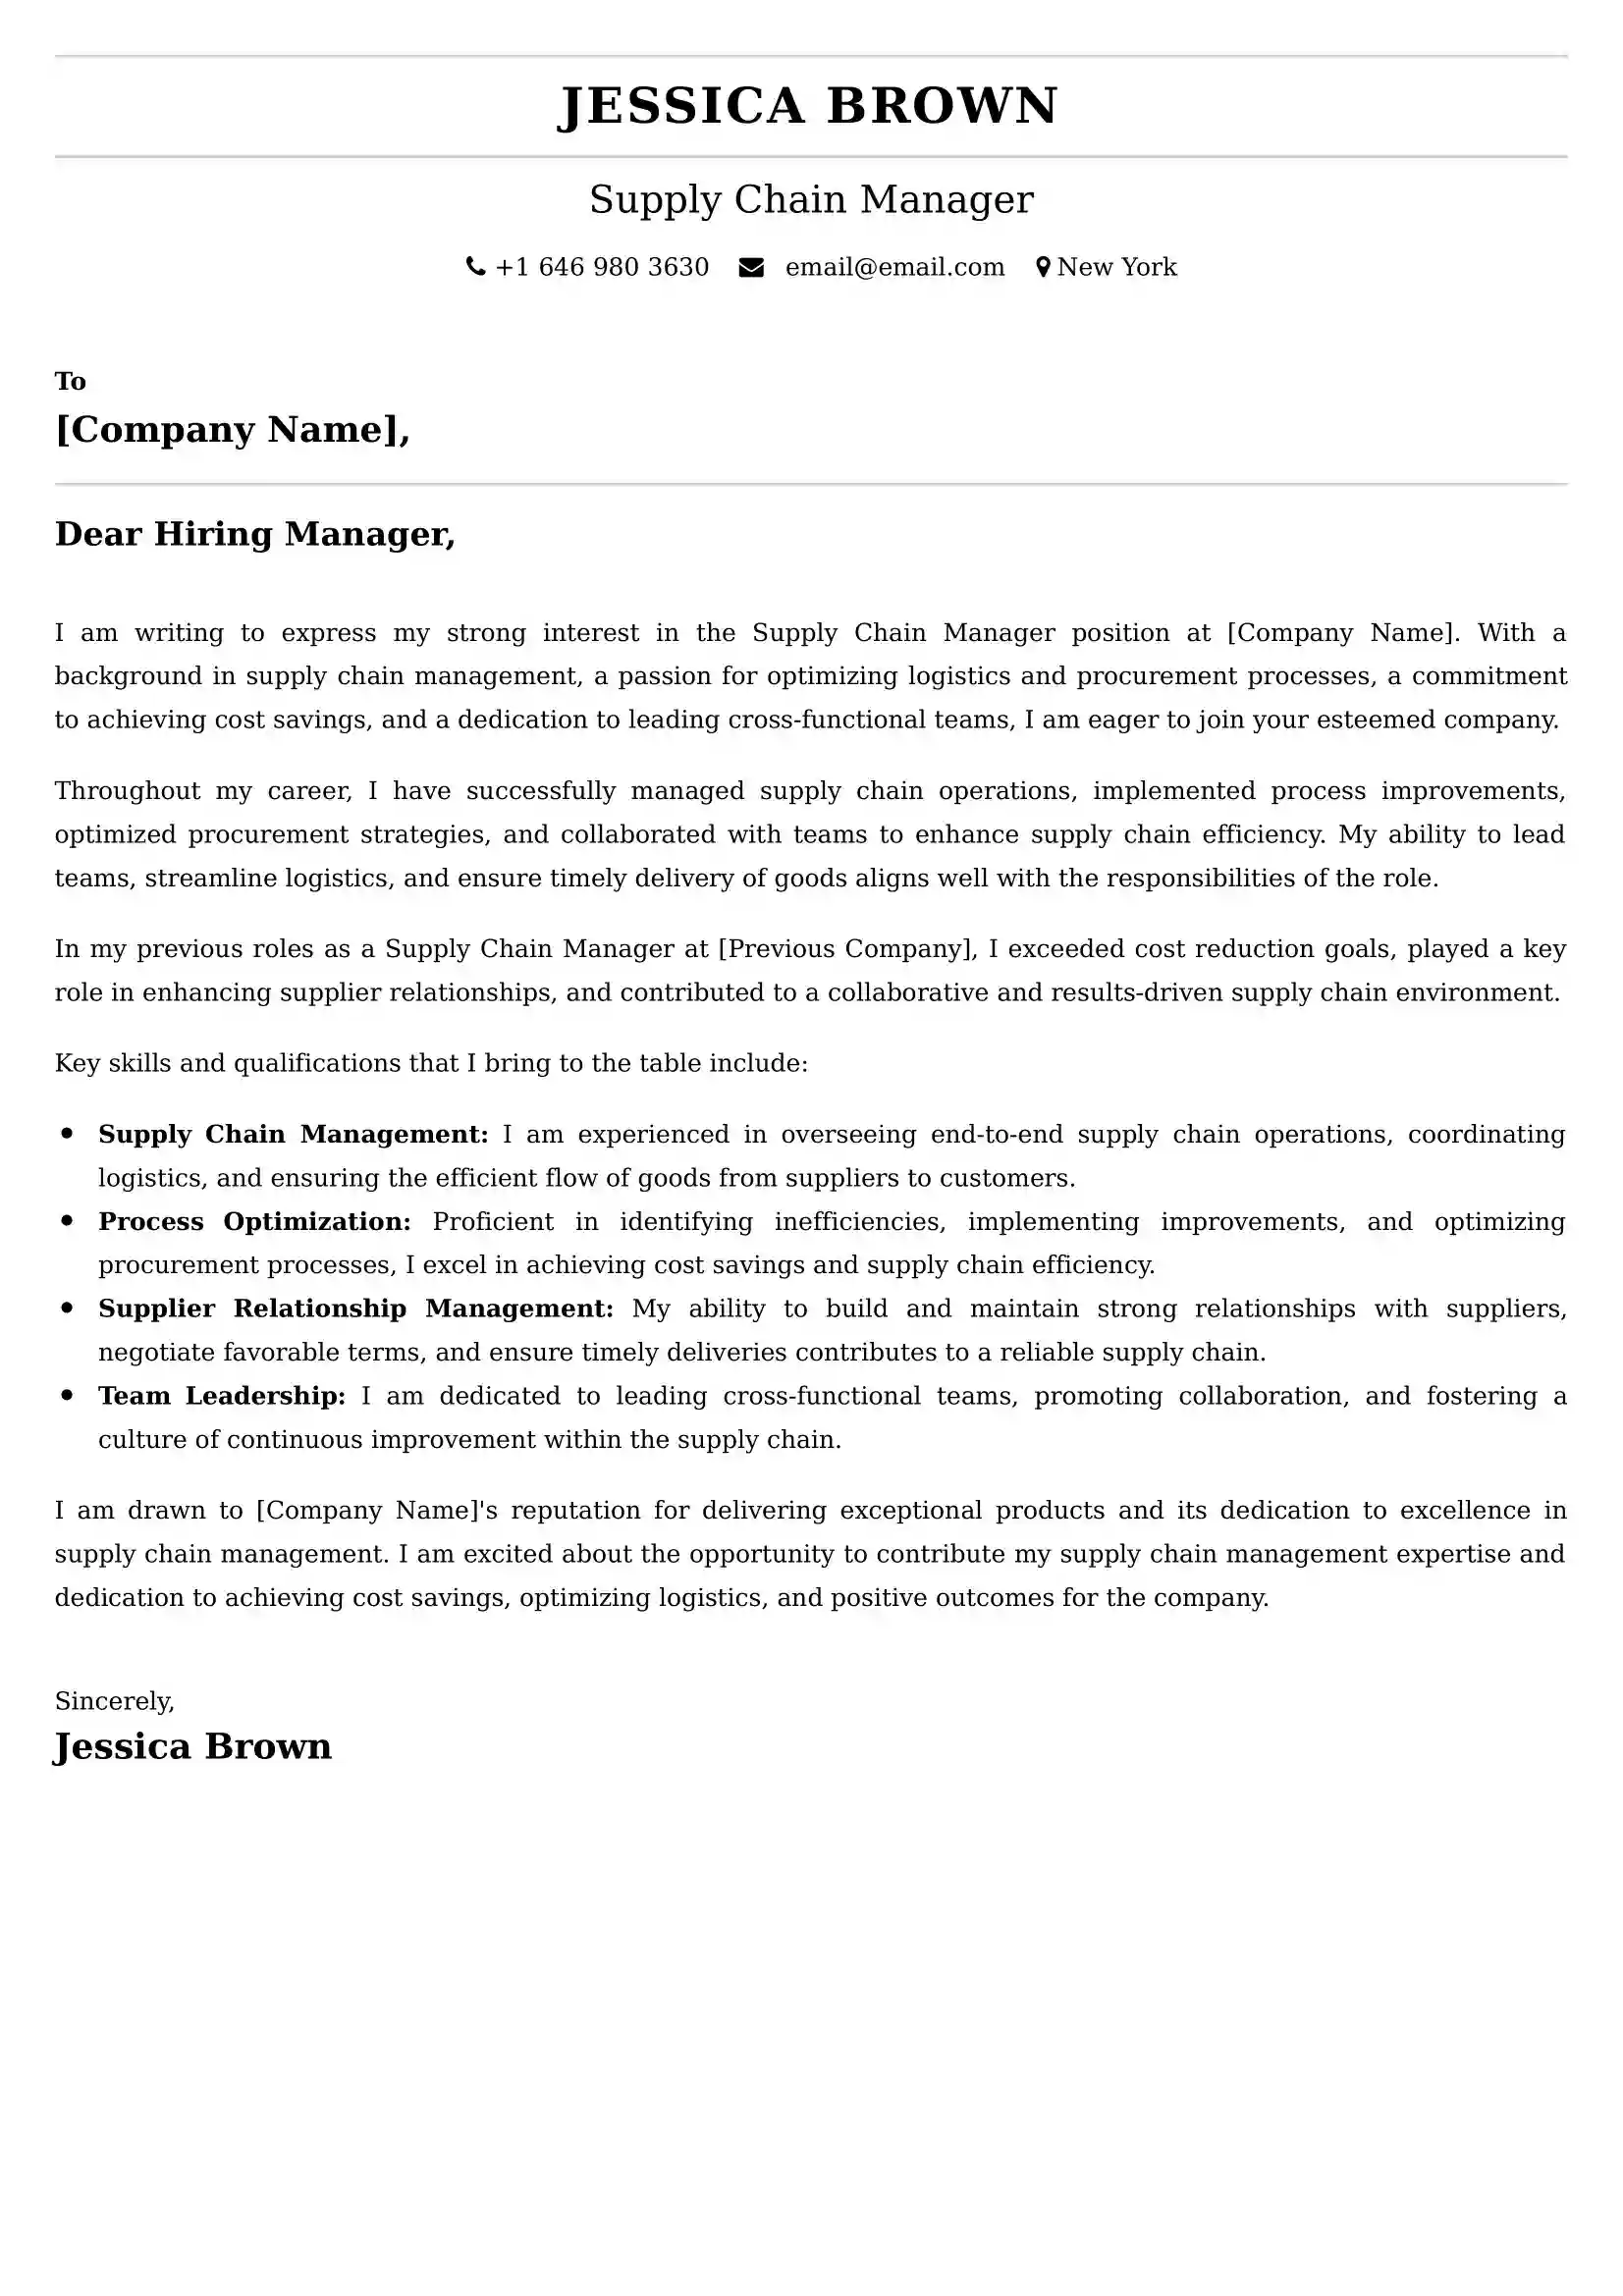 Supply Chain Manager Cover Letter Examples -Latest Brazilian Templates